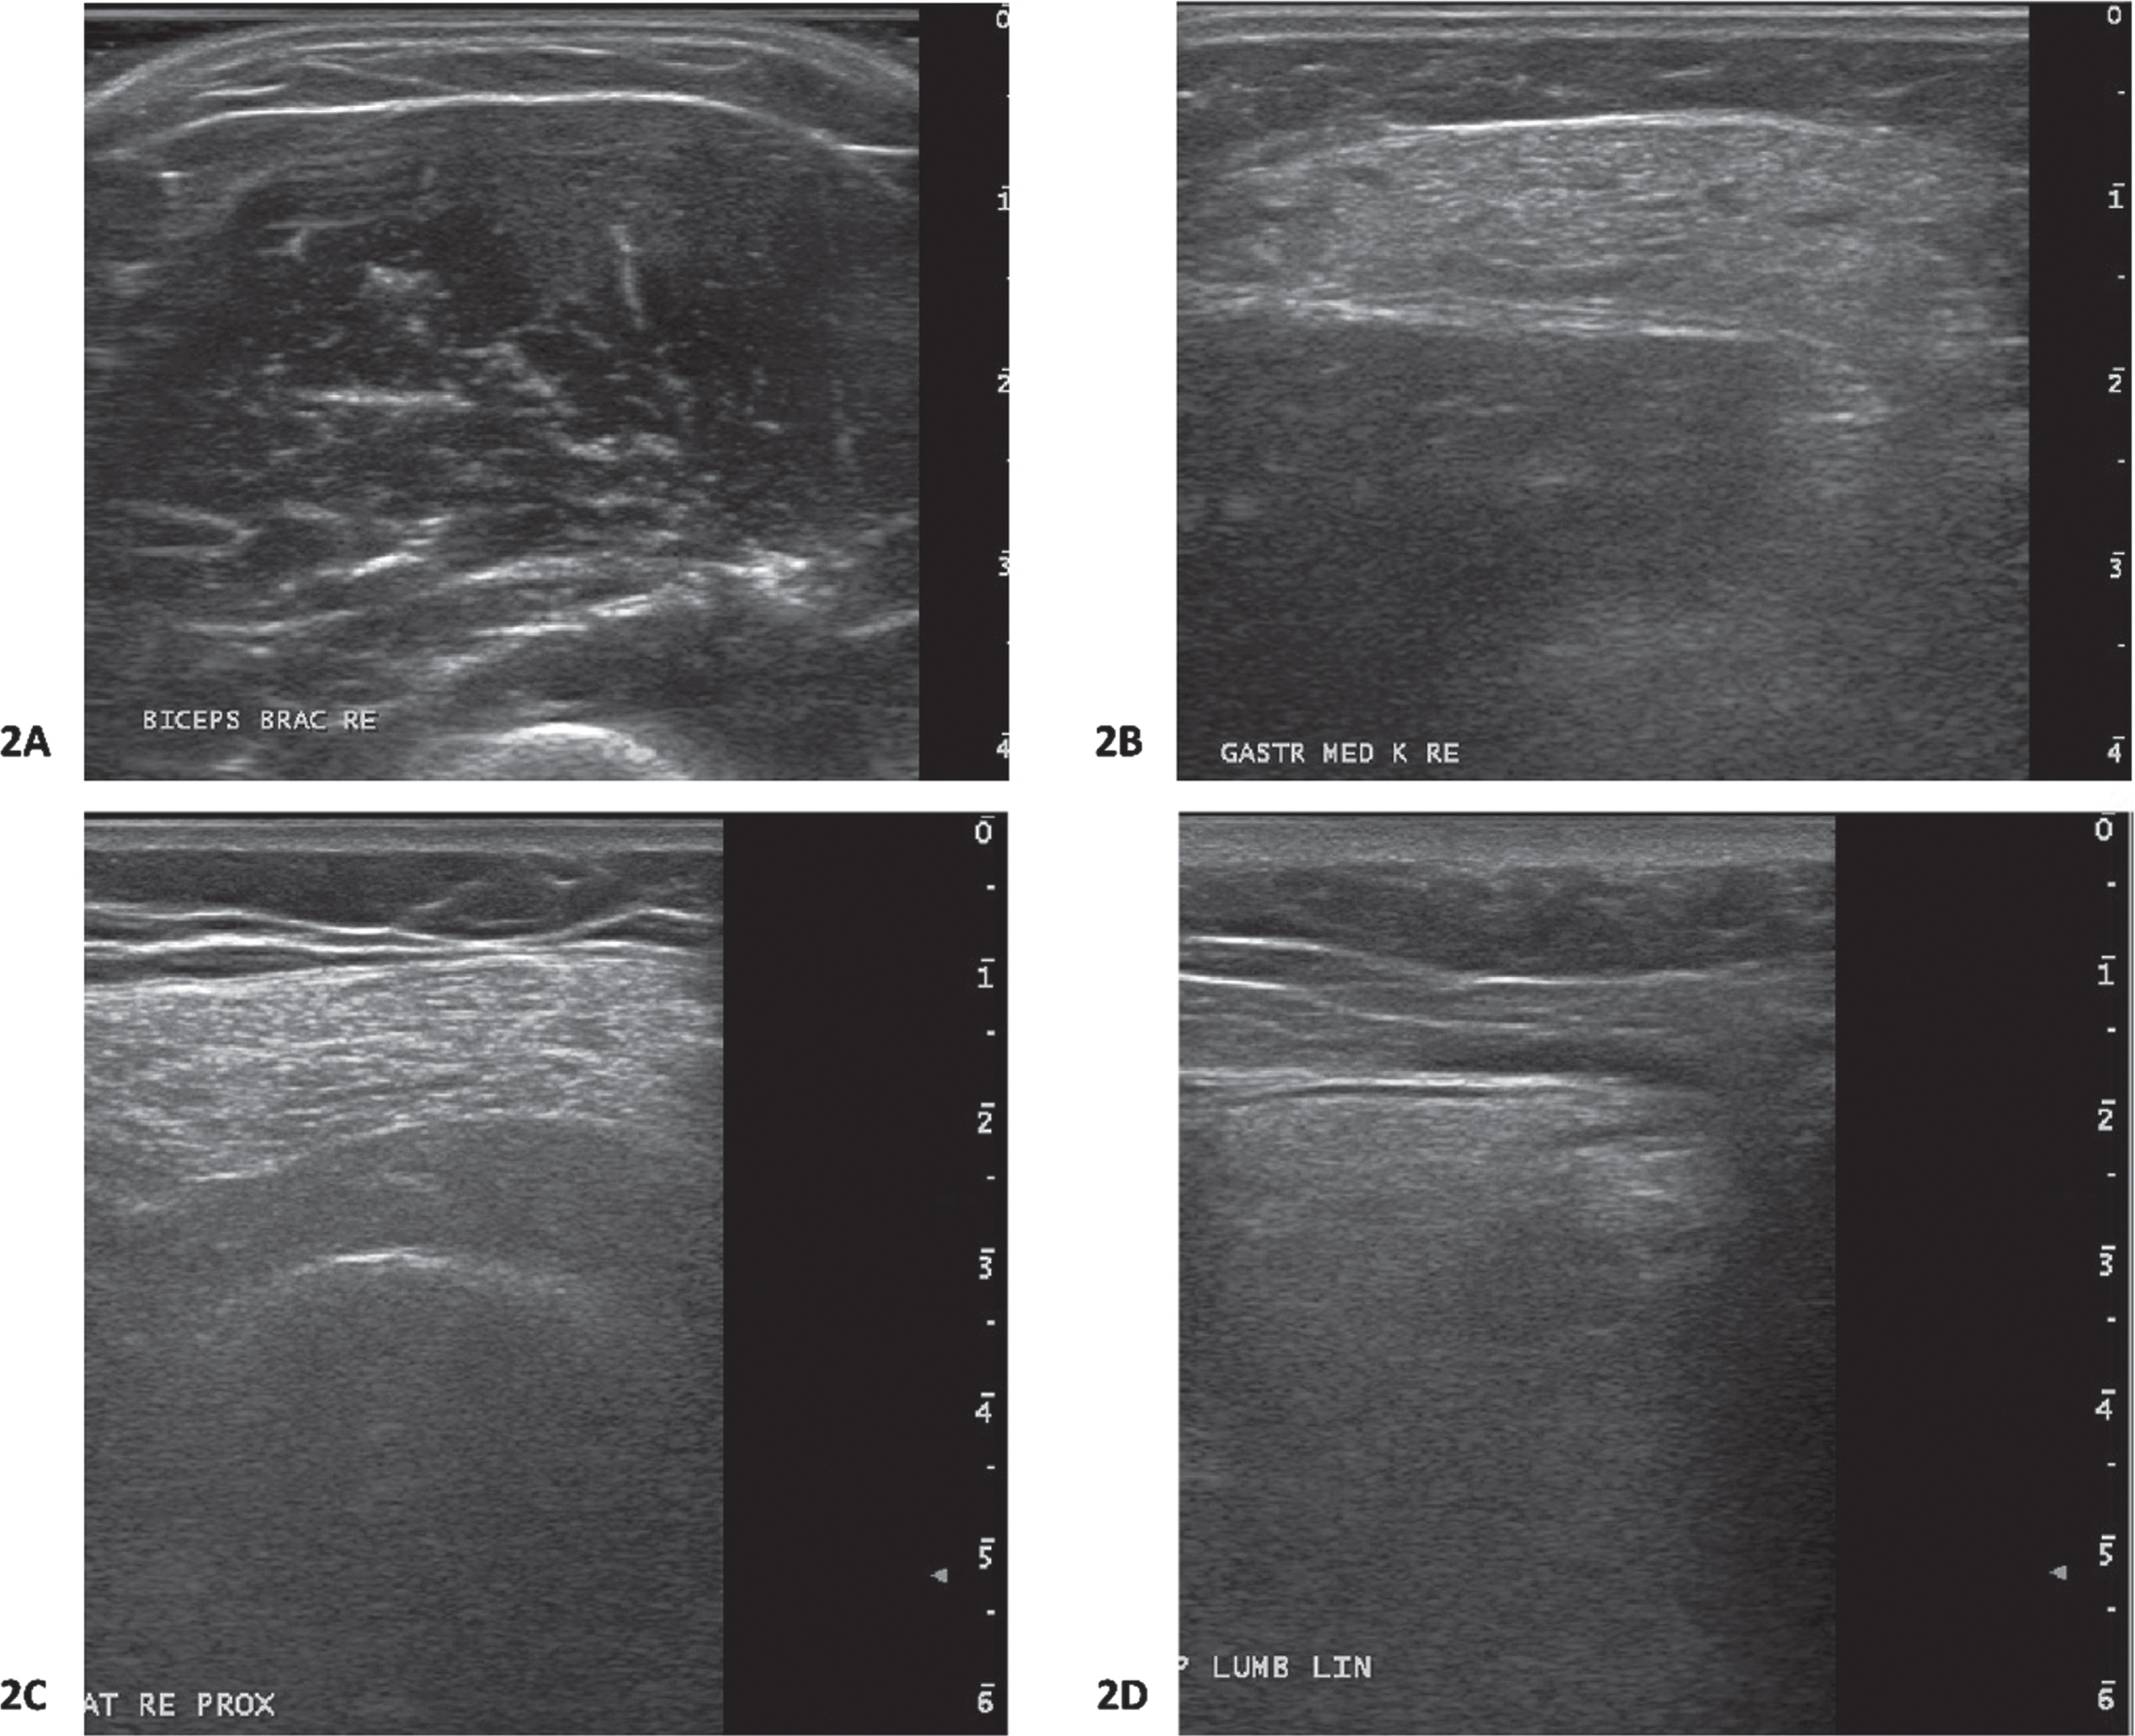 Muscle ultrasound images from participants. 2A: Biceps brachii muscle ultrasound image from a participants with late-onset proximal muscle weakness. This muscle ultrasound image shows normal echogenicity (Heckmatt rating scale(22) 1; z-score –3.7). The z-score for muscle thickness was 1.5. This participants carries the RYR1 c.12226C>T, p.Phe4076Leu variant. 2B: Gastrocnemius muscle ultrasound image from a participant with late-onset proximal muscle weakness. This muscle ultrasound image shows increased echogenicity (Heckmatt rating scale 3;(22) z-score 4.0). The z-score for muscle thickness was –1.2. This participants carries the RYR1 c.10616G>A, p.Arg3539His variant. This gastrocnemius muscle ultrasound image is from the same participant whose proximal vastus lateralis muscle ultrasound image is shown in Fig. 2C. 2C: Proximal vastus lateralis muscle ultrasound image from a participant with late-onset proximal muscle weakness. This muscle ultrasound image shows an increased echogenicity (Heckmatt rating scale 3;(22) z-score 7.4). The z-score for muscle thickness was –1.5. This participants carries the RYR1 c.10616G>A, p.Arg3539His variant. This proximal vastus lateralis muscle ultrasound image is from the same participant whose gastrocnemius muscle ultrasound image is shown in Fig. 2B. 2D: Paraspinal lumbar muscle ultrasound image from a participant with symptoms of cramps and myalgia. This muscle ultrasound image shows an increased echogenicity (Heckmatt rating scale 3;(22) z-score 3.1). The z-score for muscle thickness was –1.5. This participants carries the RYR1 c.1021G>A, Gly341Arg variant.